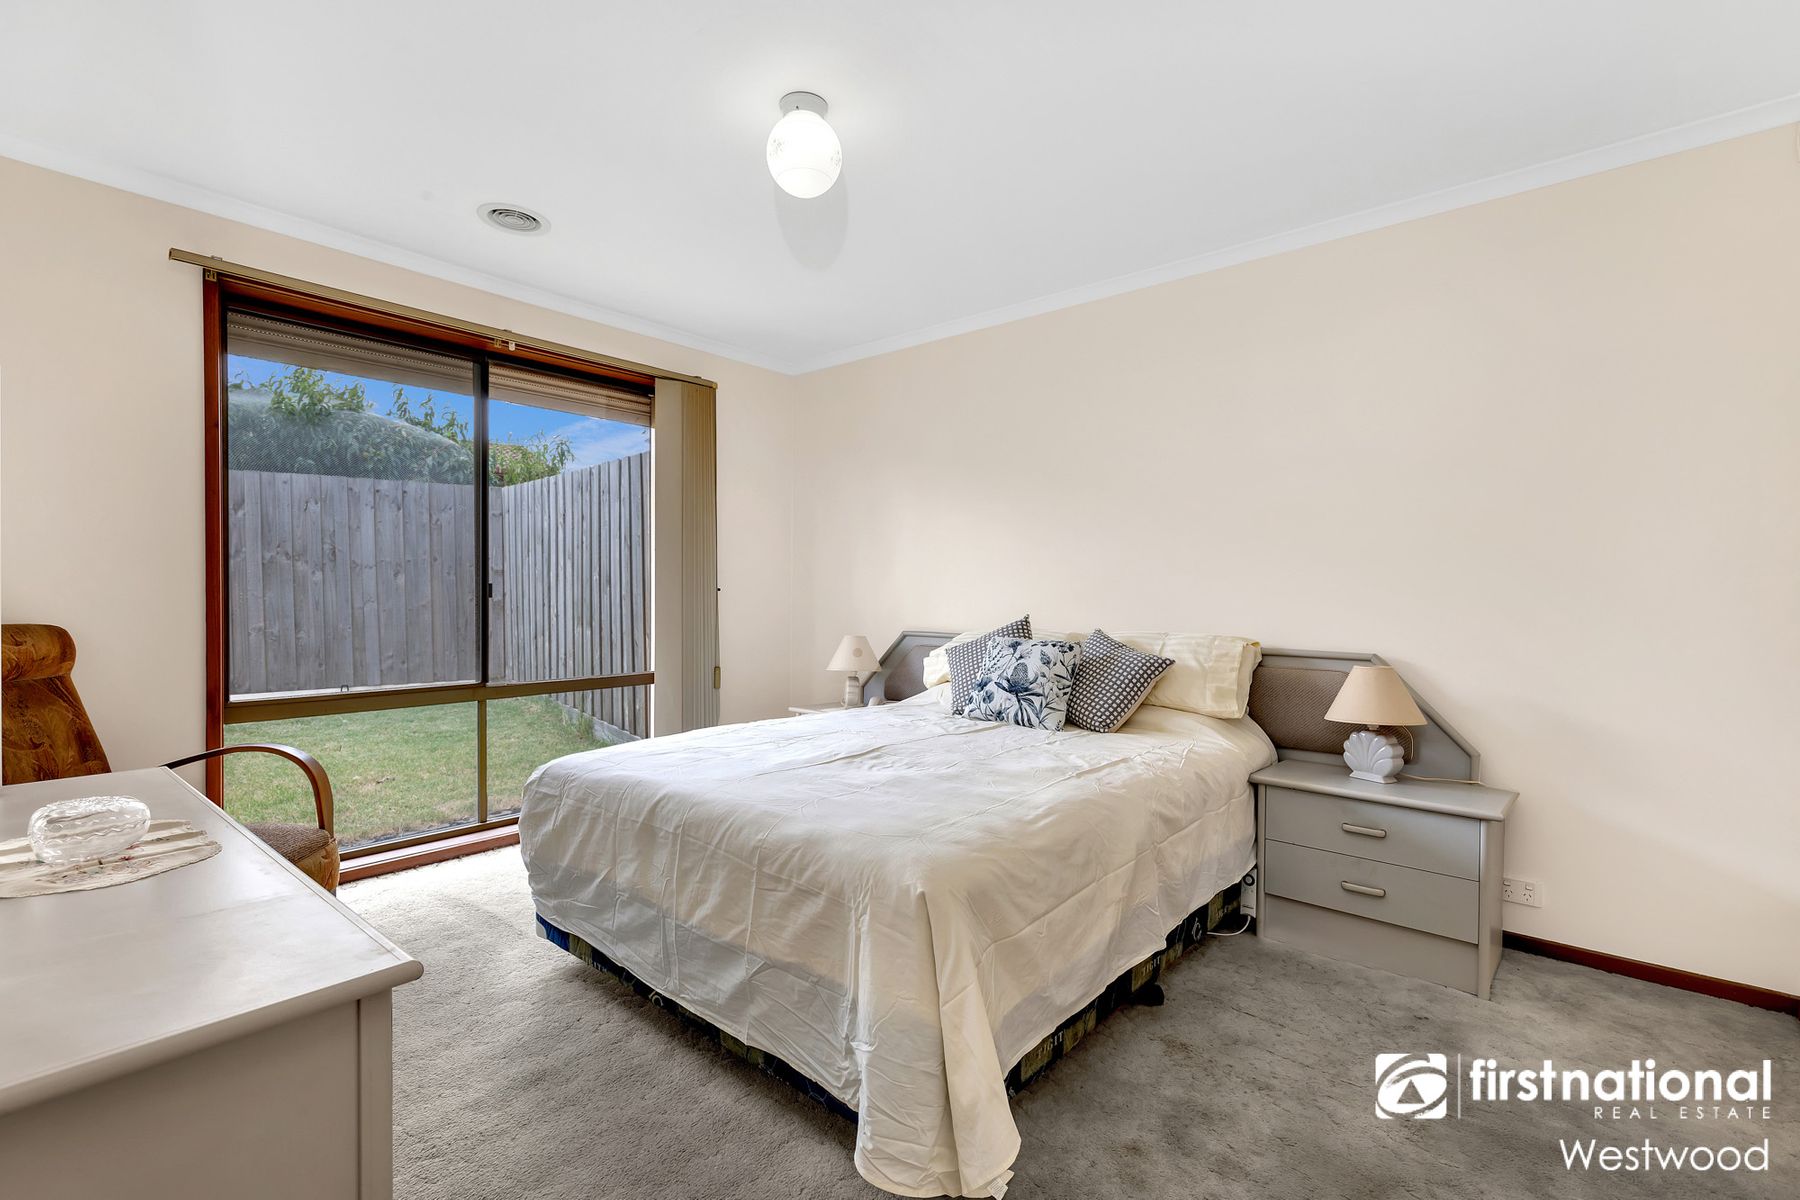 77 Barber Drive, Hoppers Crossing, VIC 3029